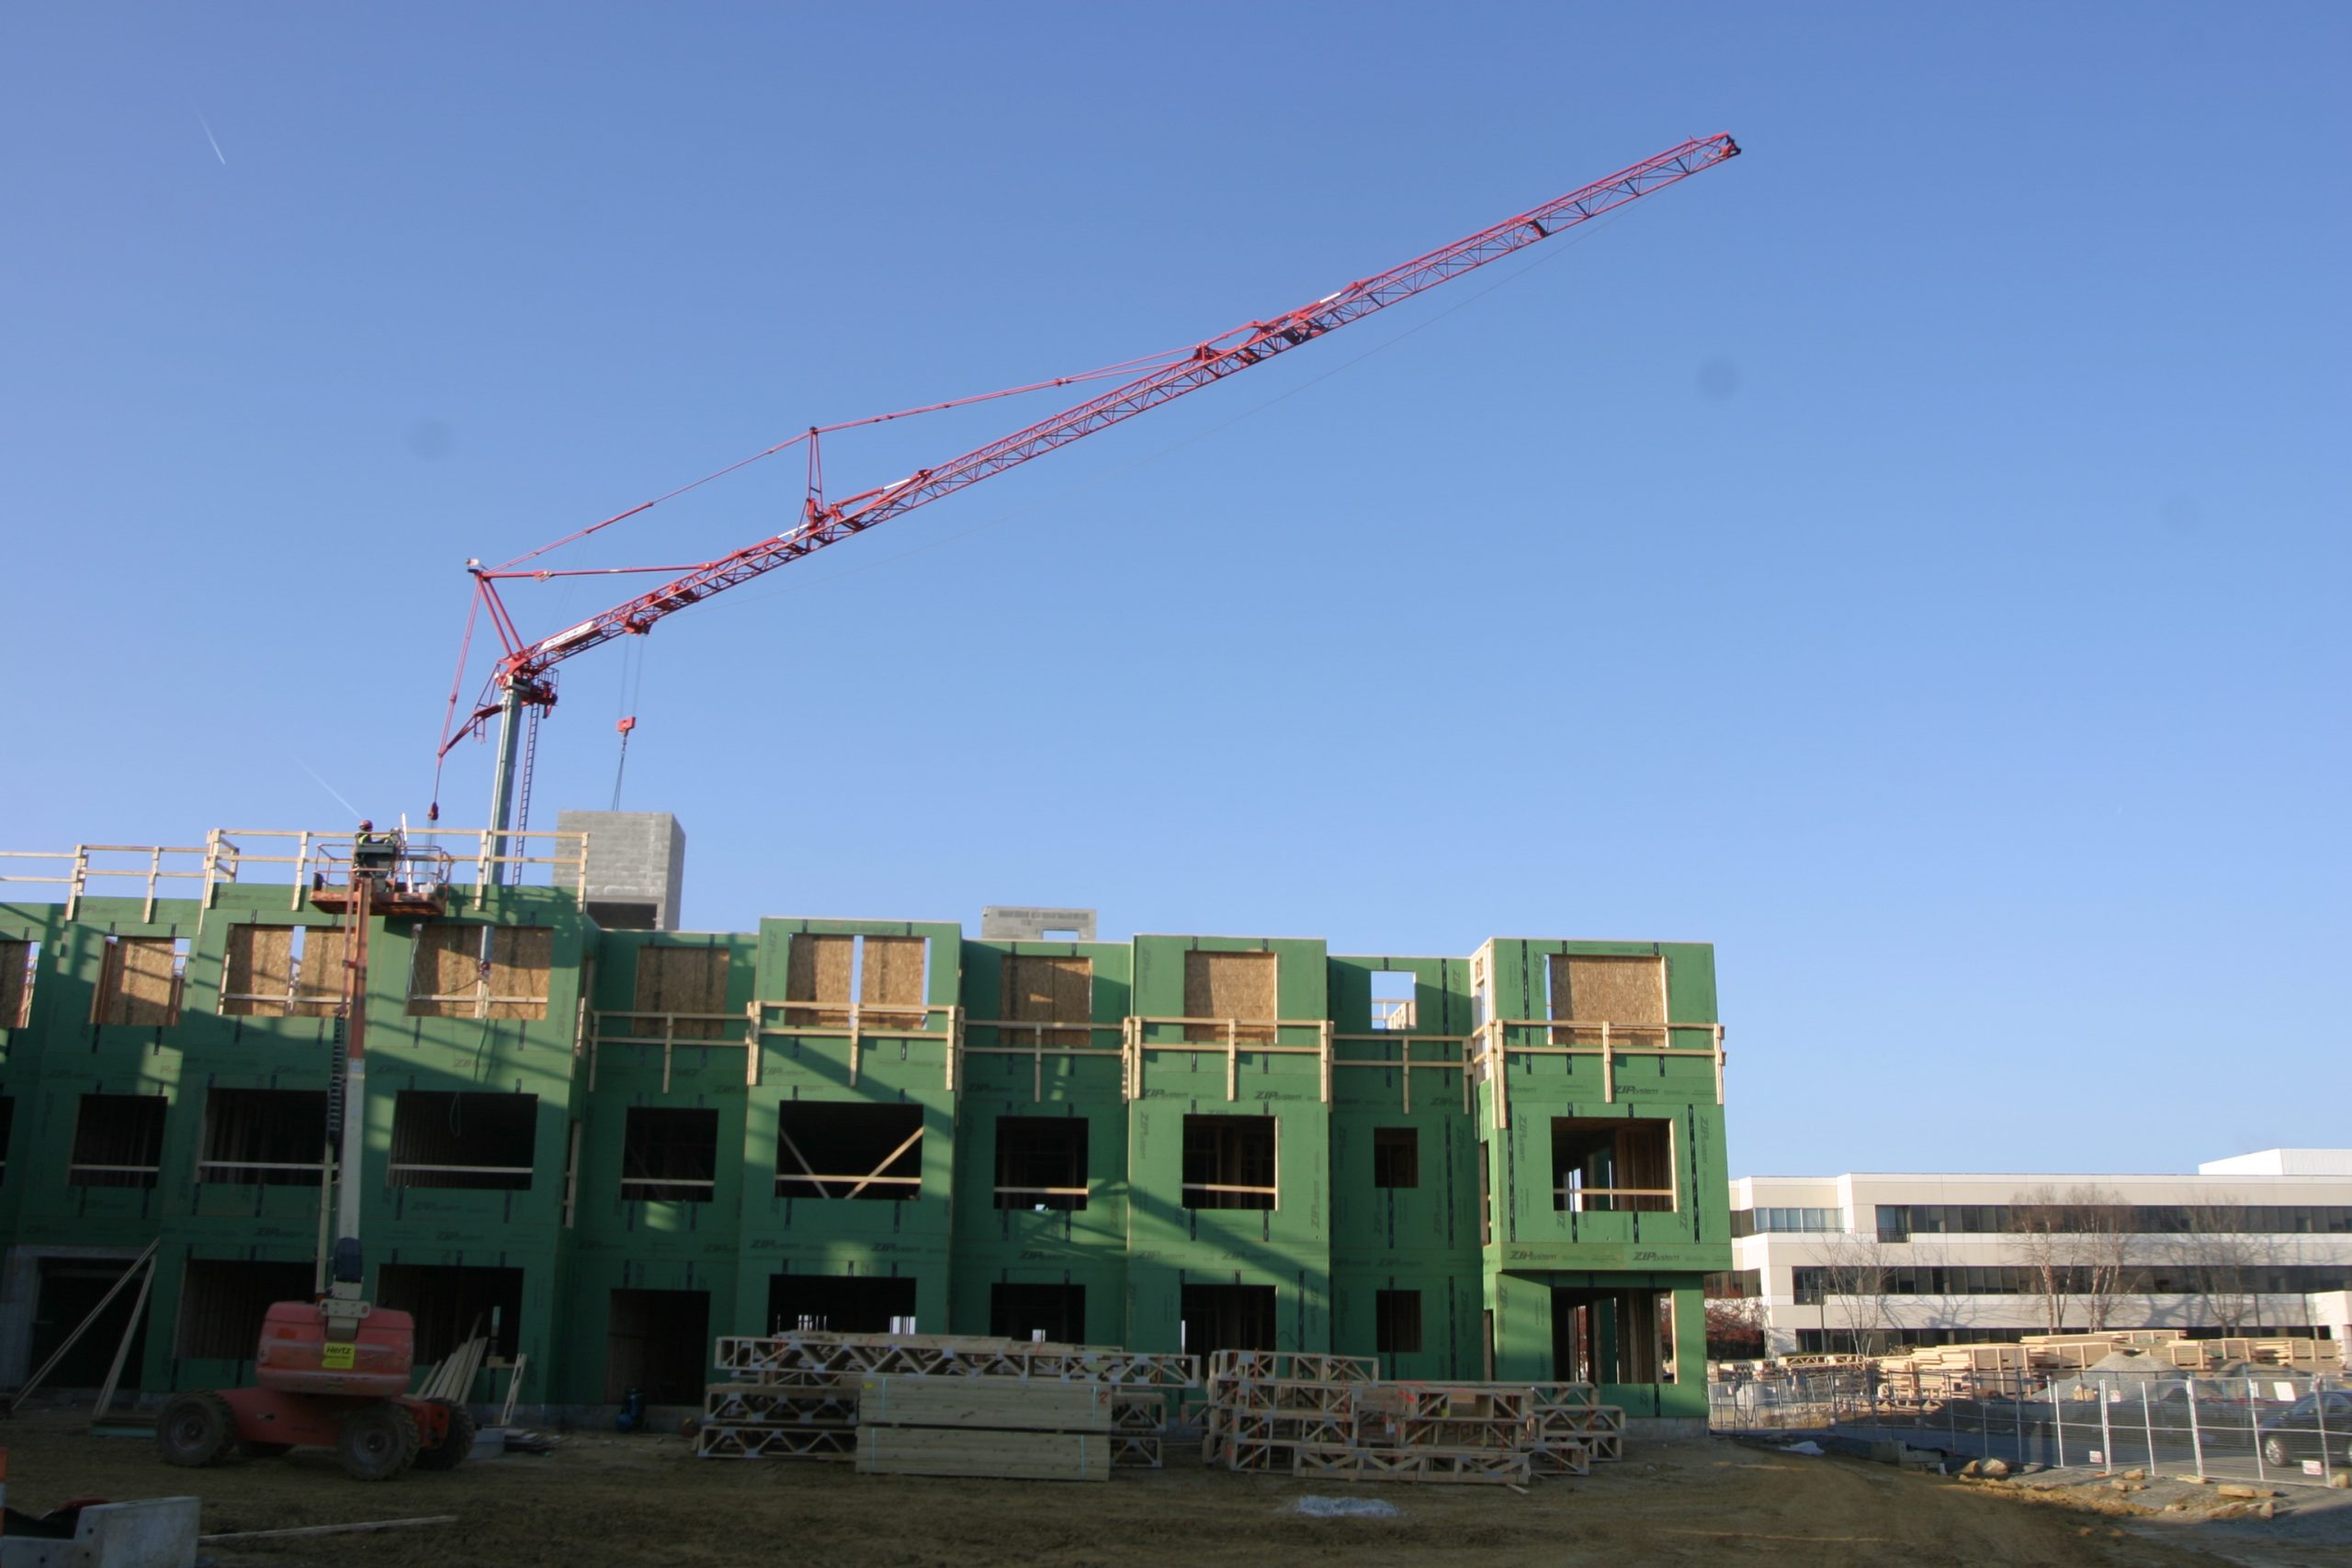 An Insight on Lifting Trusses with Cranes